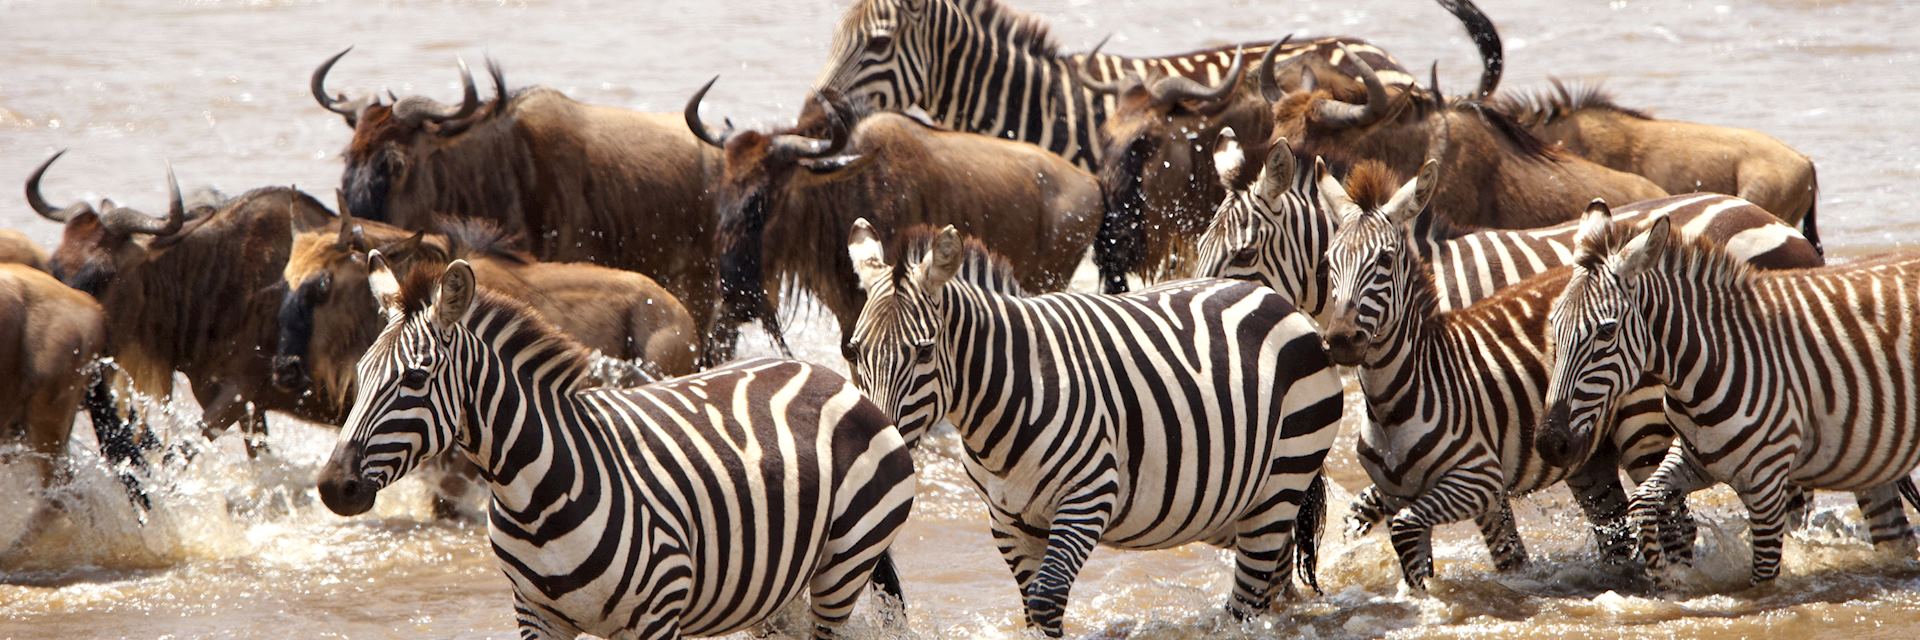 Zebra and wildebeest in South Africa